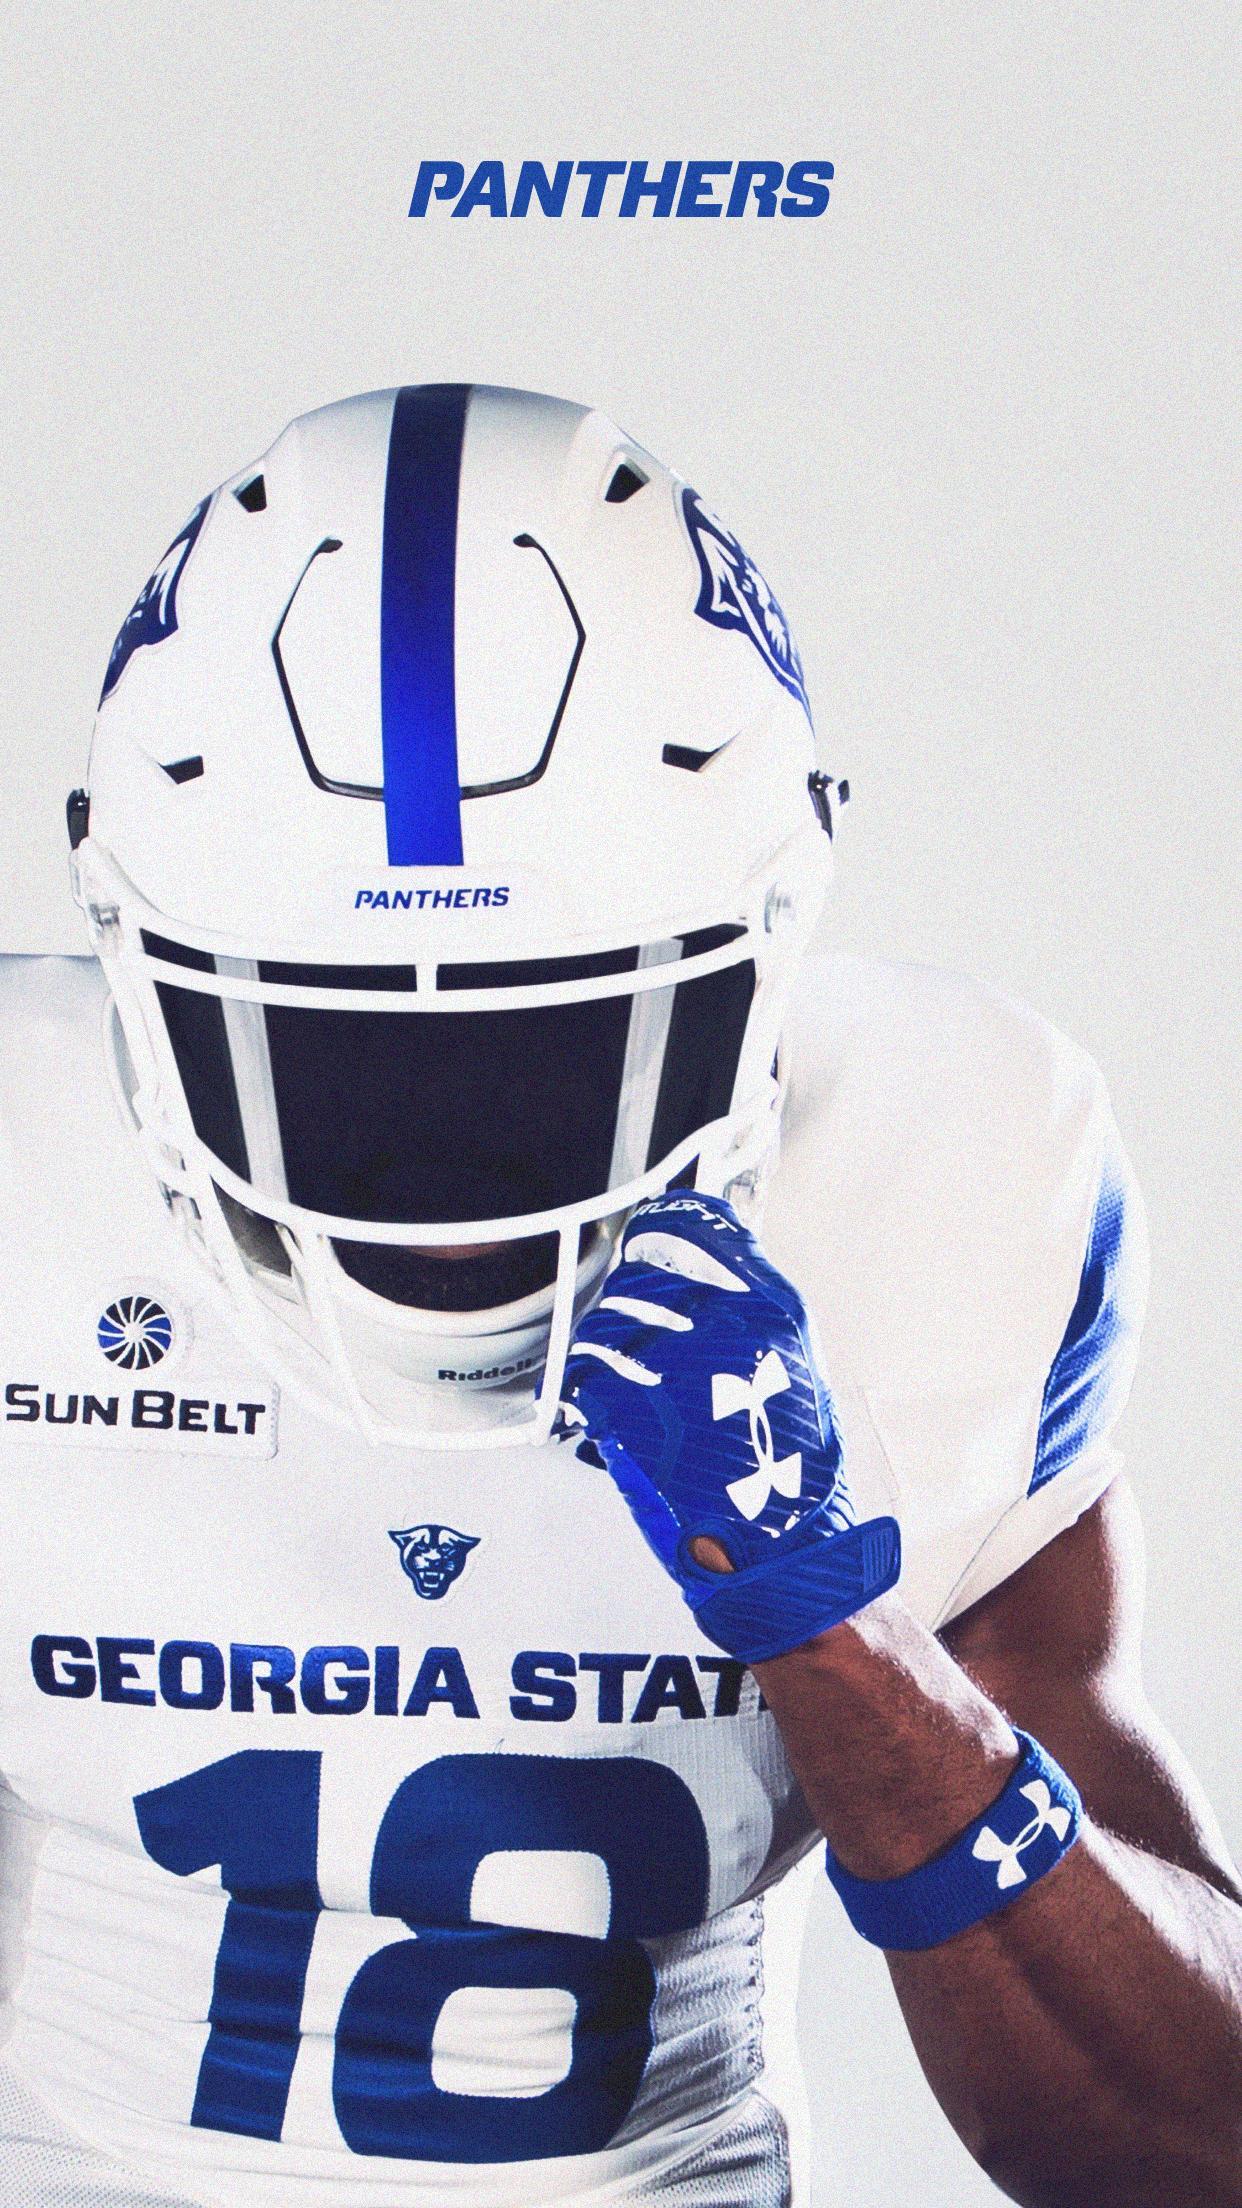 Georgia State Phone Wallpaper Official Athletic Site of the Georgia State University Panthers